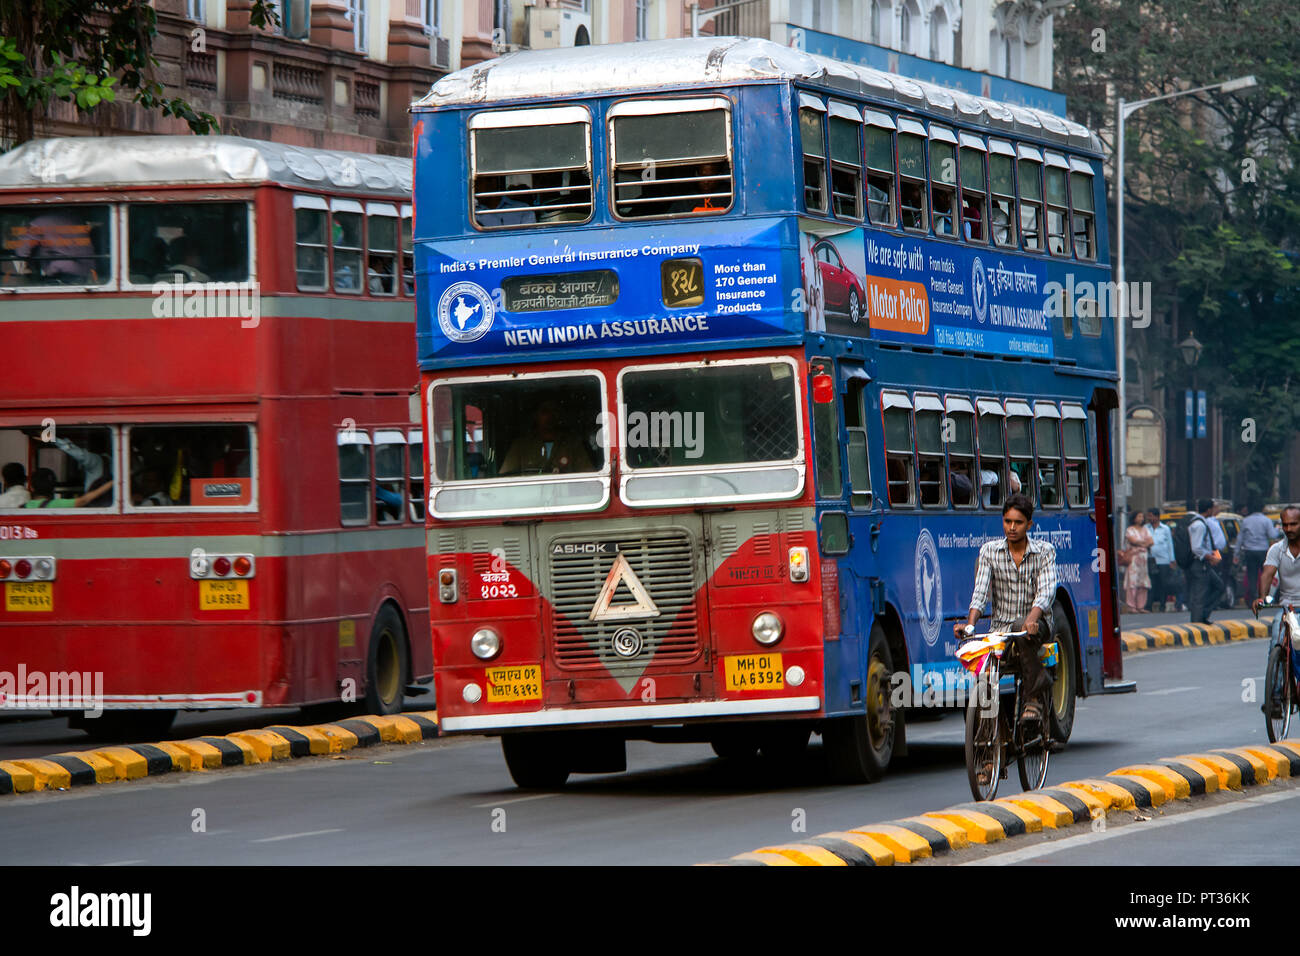 An old well used double decker 2 story Leyland bus passes some cyclists on the busy streets of Mumbai, India. Stock Photo